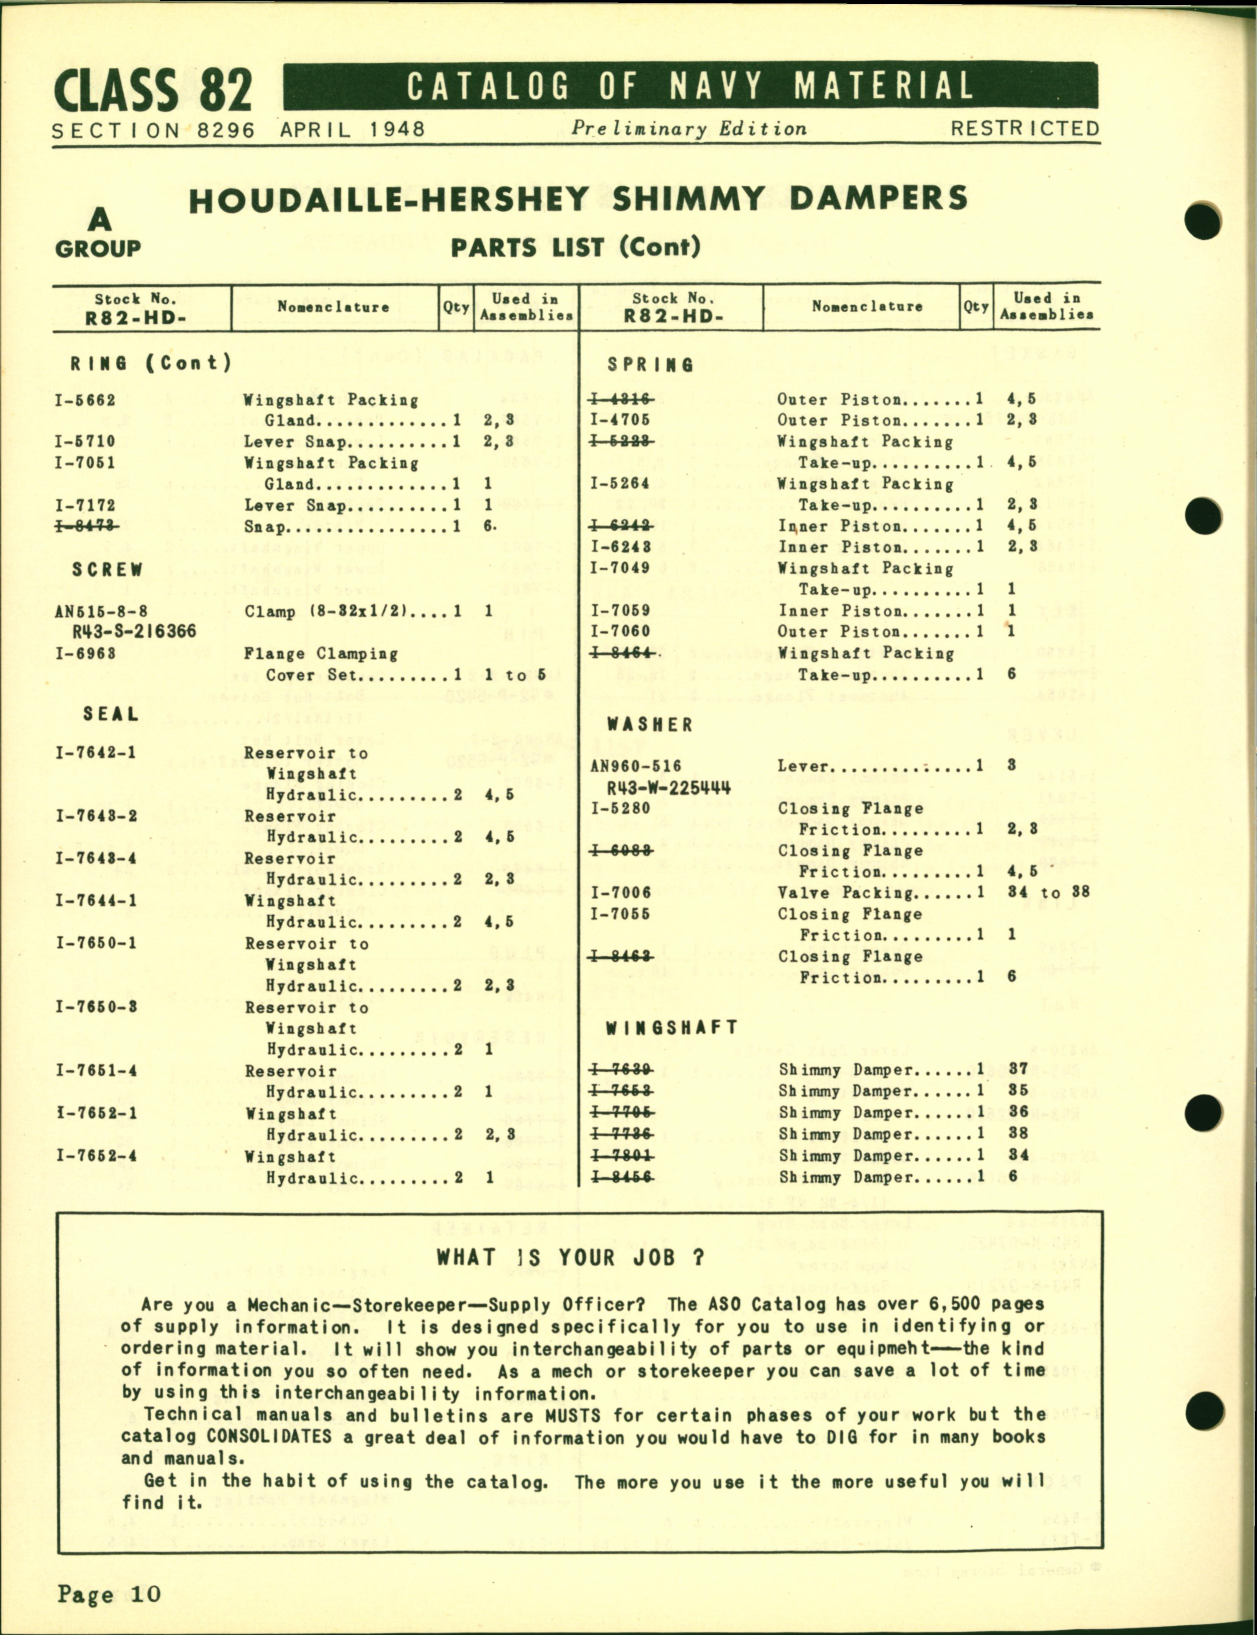 Sample page 10 from AirCorps Library document: Shimmy Dampers for Houdaille Hershey, Cleveland Pneumatic 